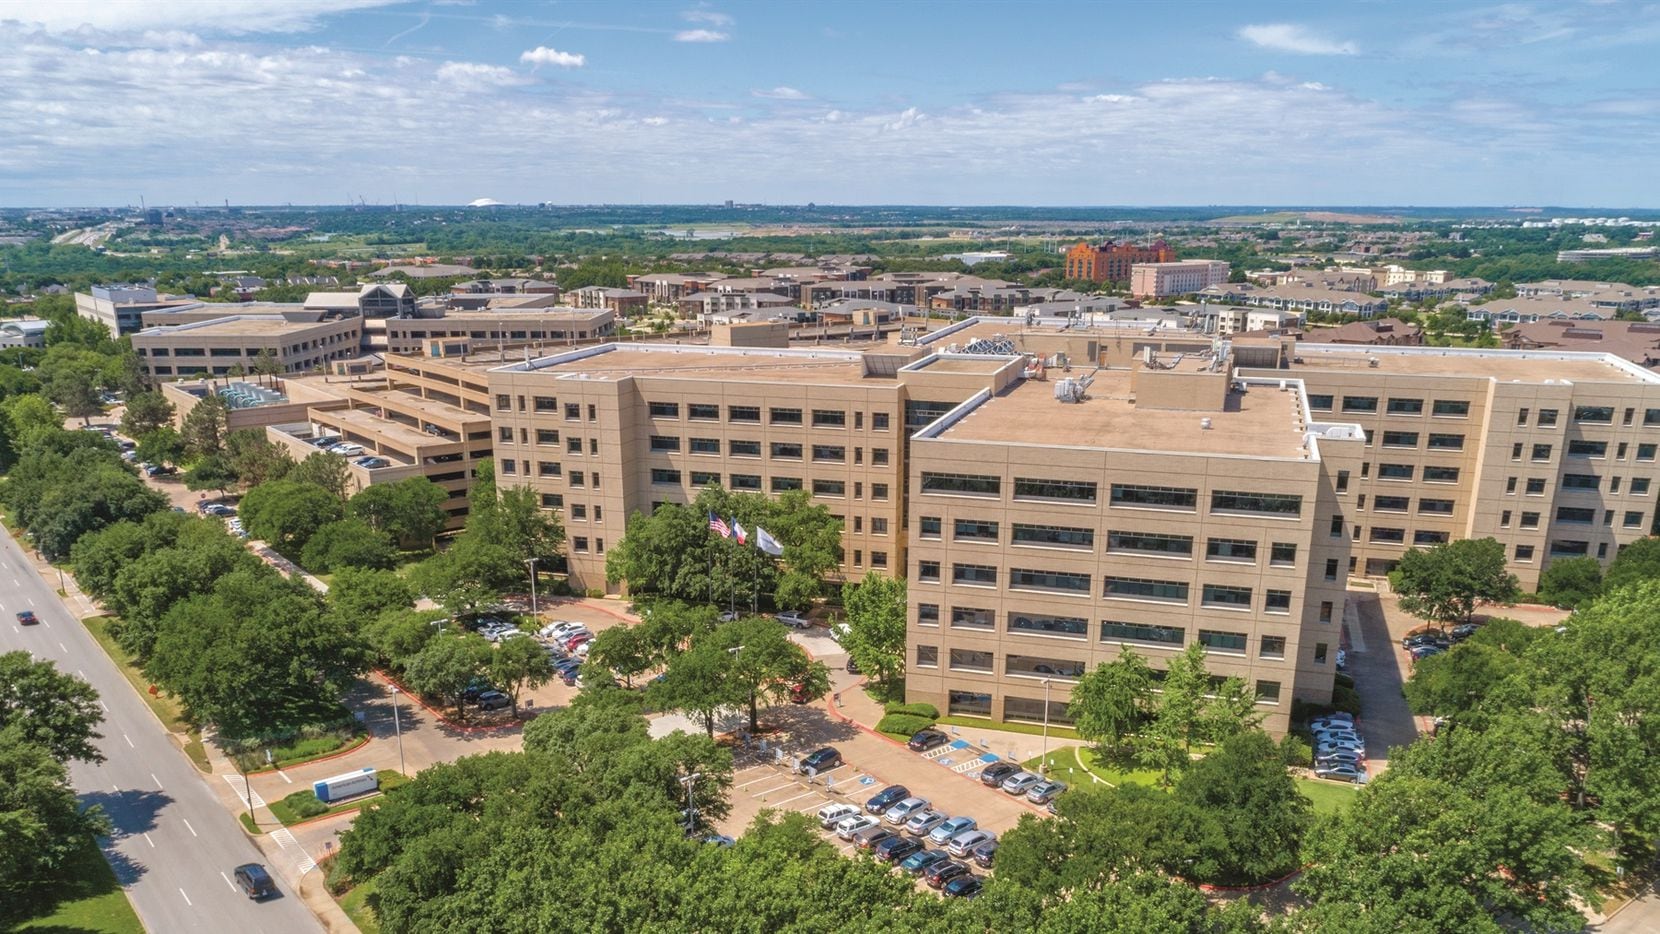 American Airlines old headquarters on the northeast edge of Fort Worth has almost 1.4 million square feet.